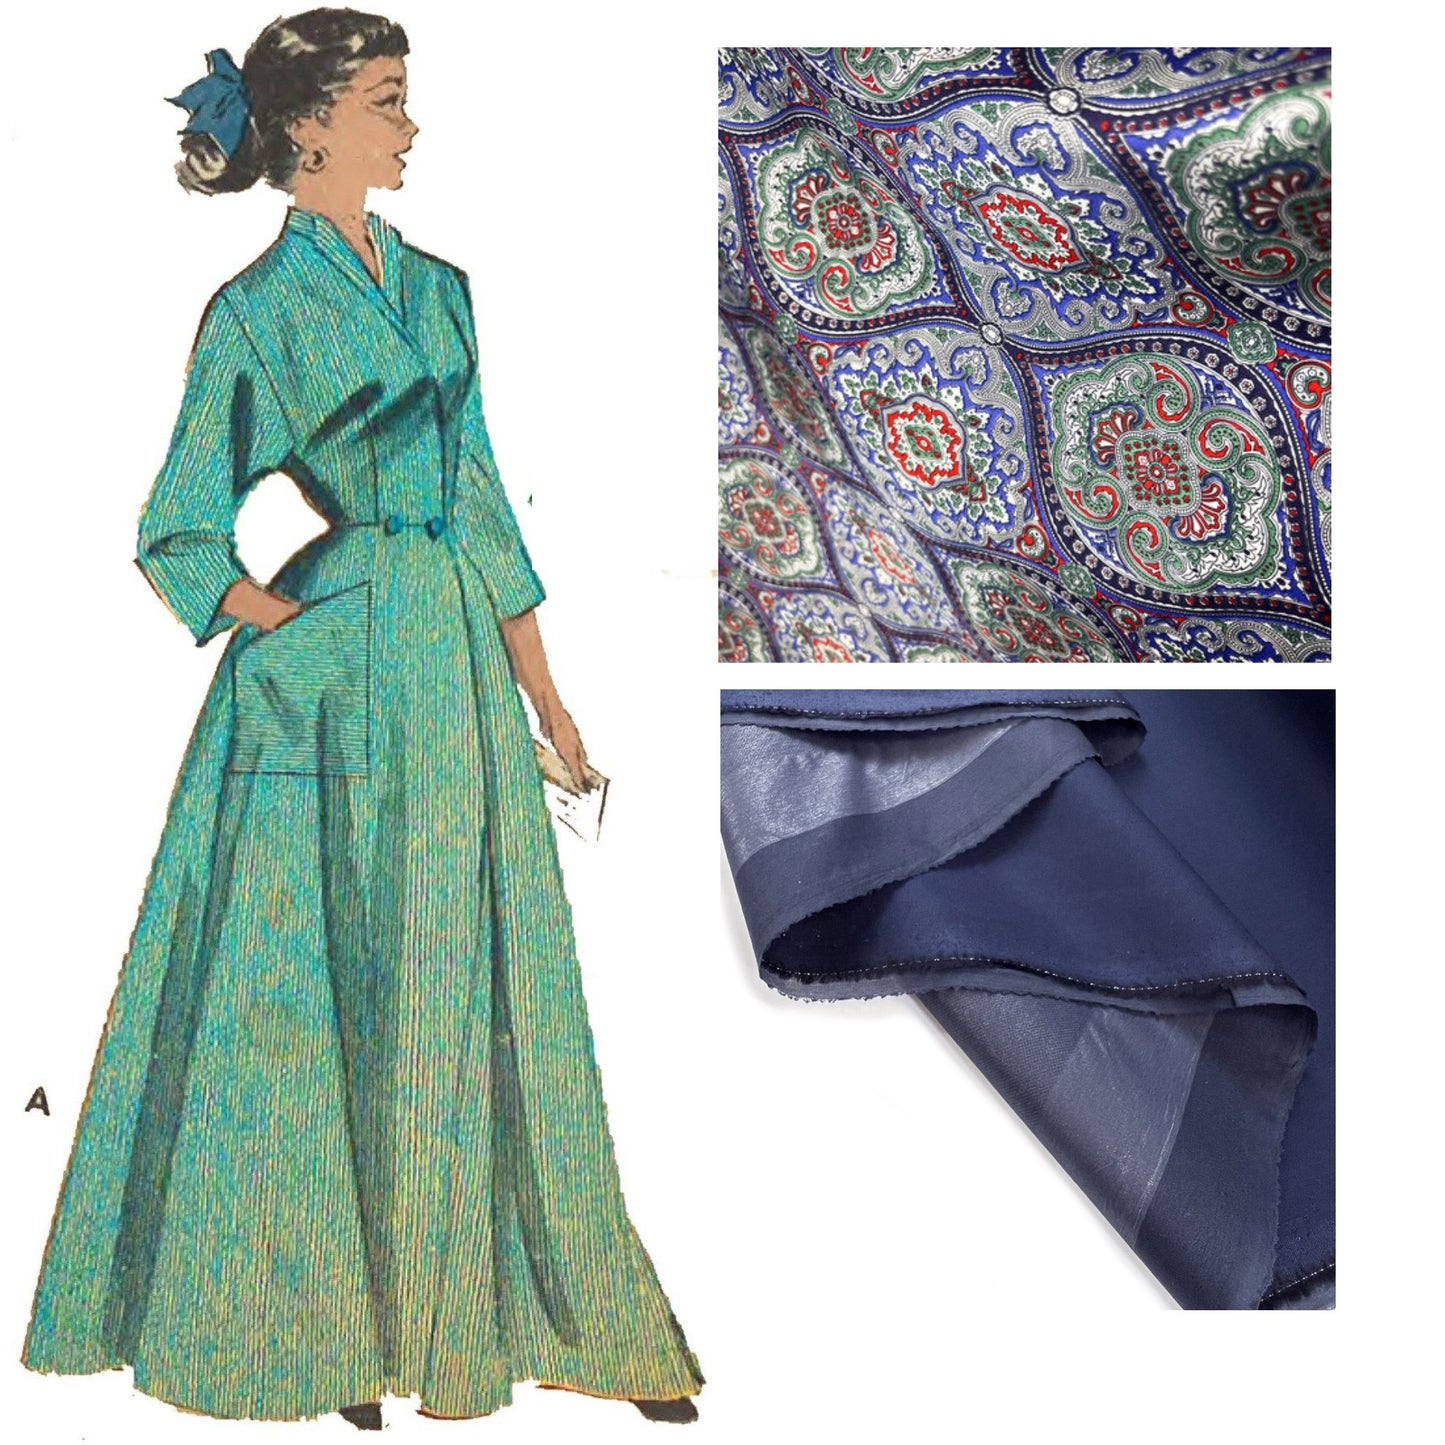 Woman wearing 'Coachman Robe'. Views A and B feature a floor length robe, and View C features a robe that finished just below the knee.